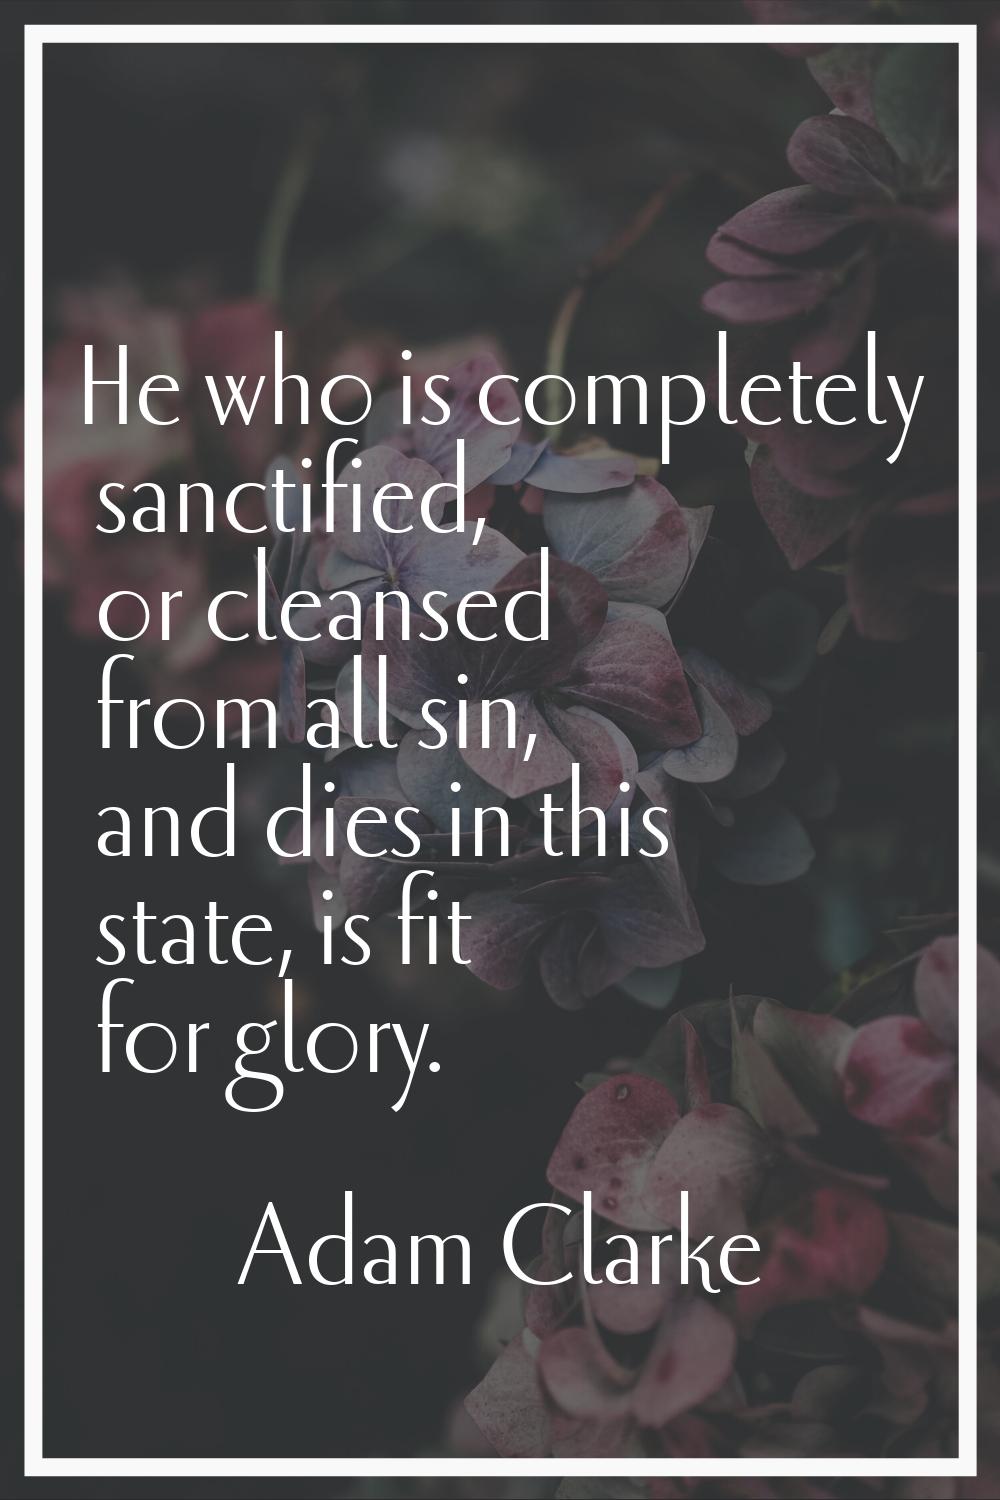 He who is completely sanctified, or cleansed from all sin, and dies in this state, is fit for glory